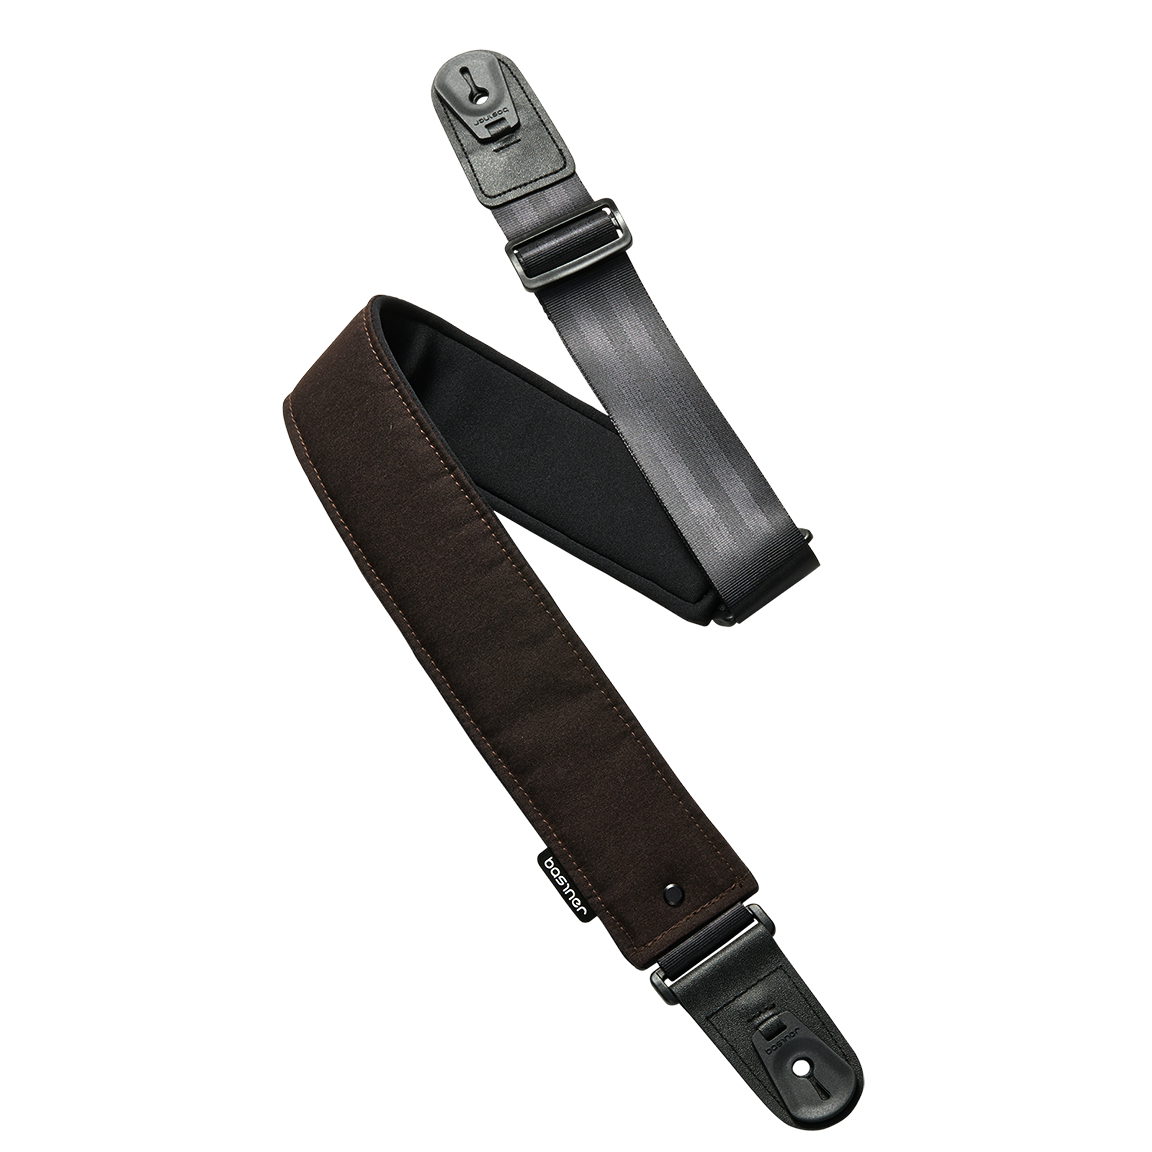 The Most Comfortable & Ergonomic Bass and Guitar Straps